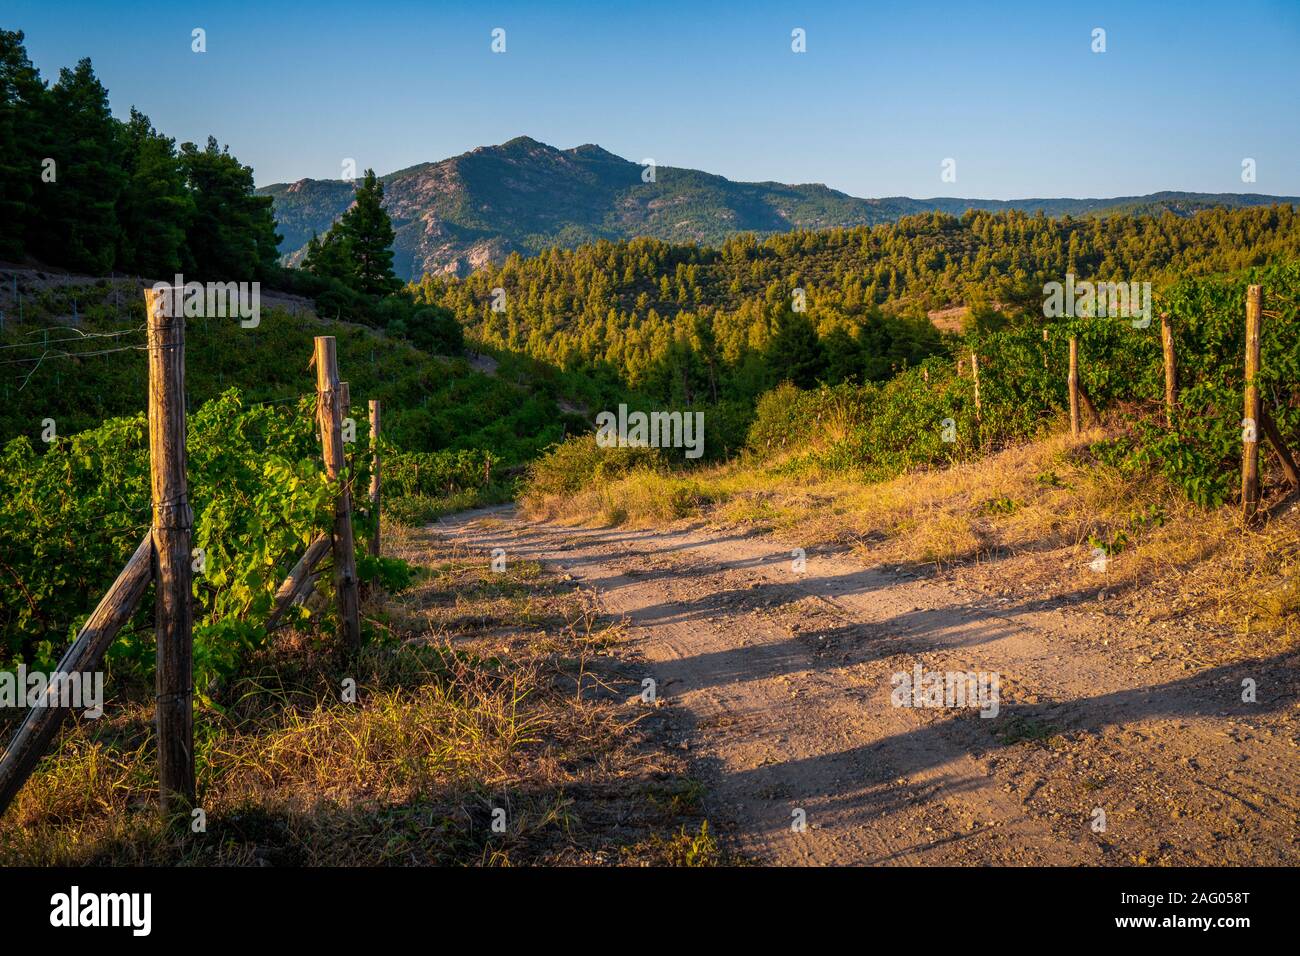 Green trees and turn the road to the mountains in Greece horizontal Stock Photo